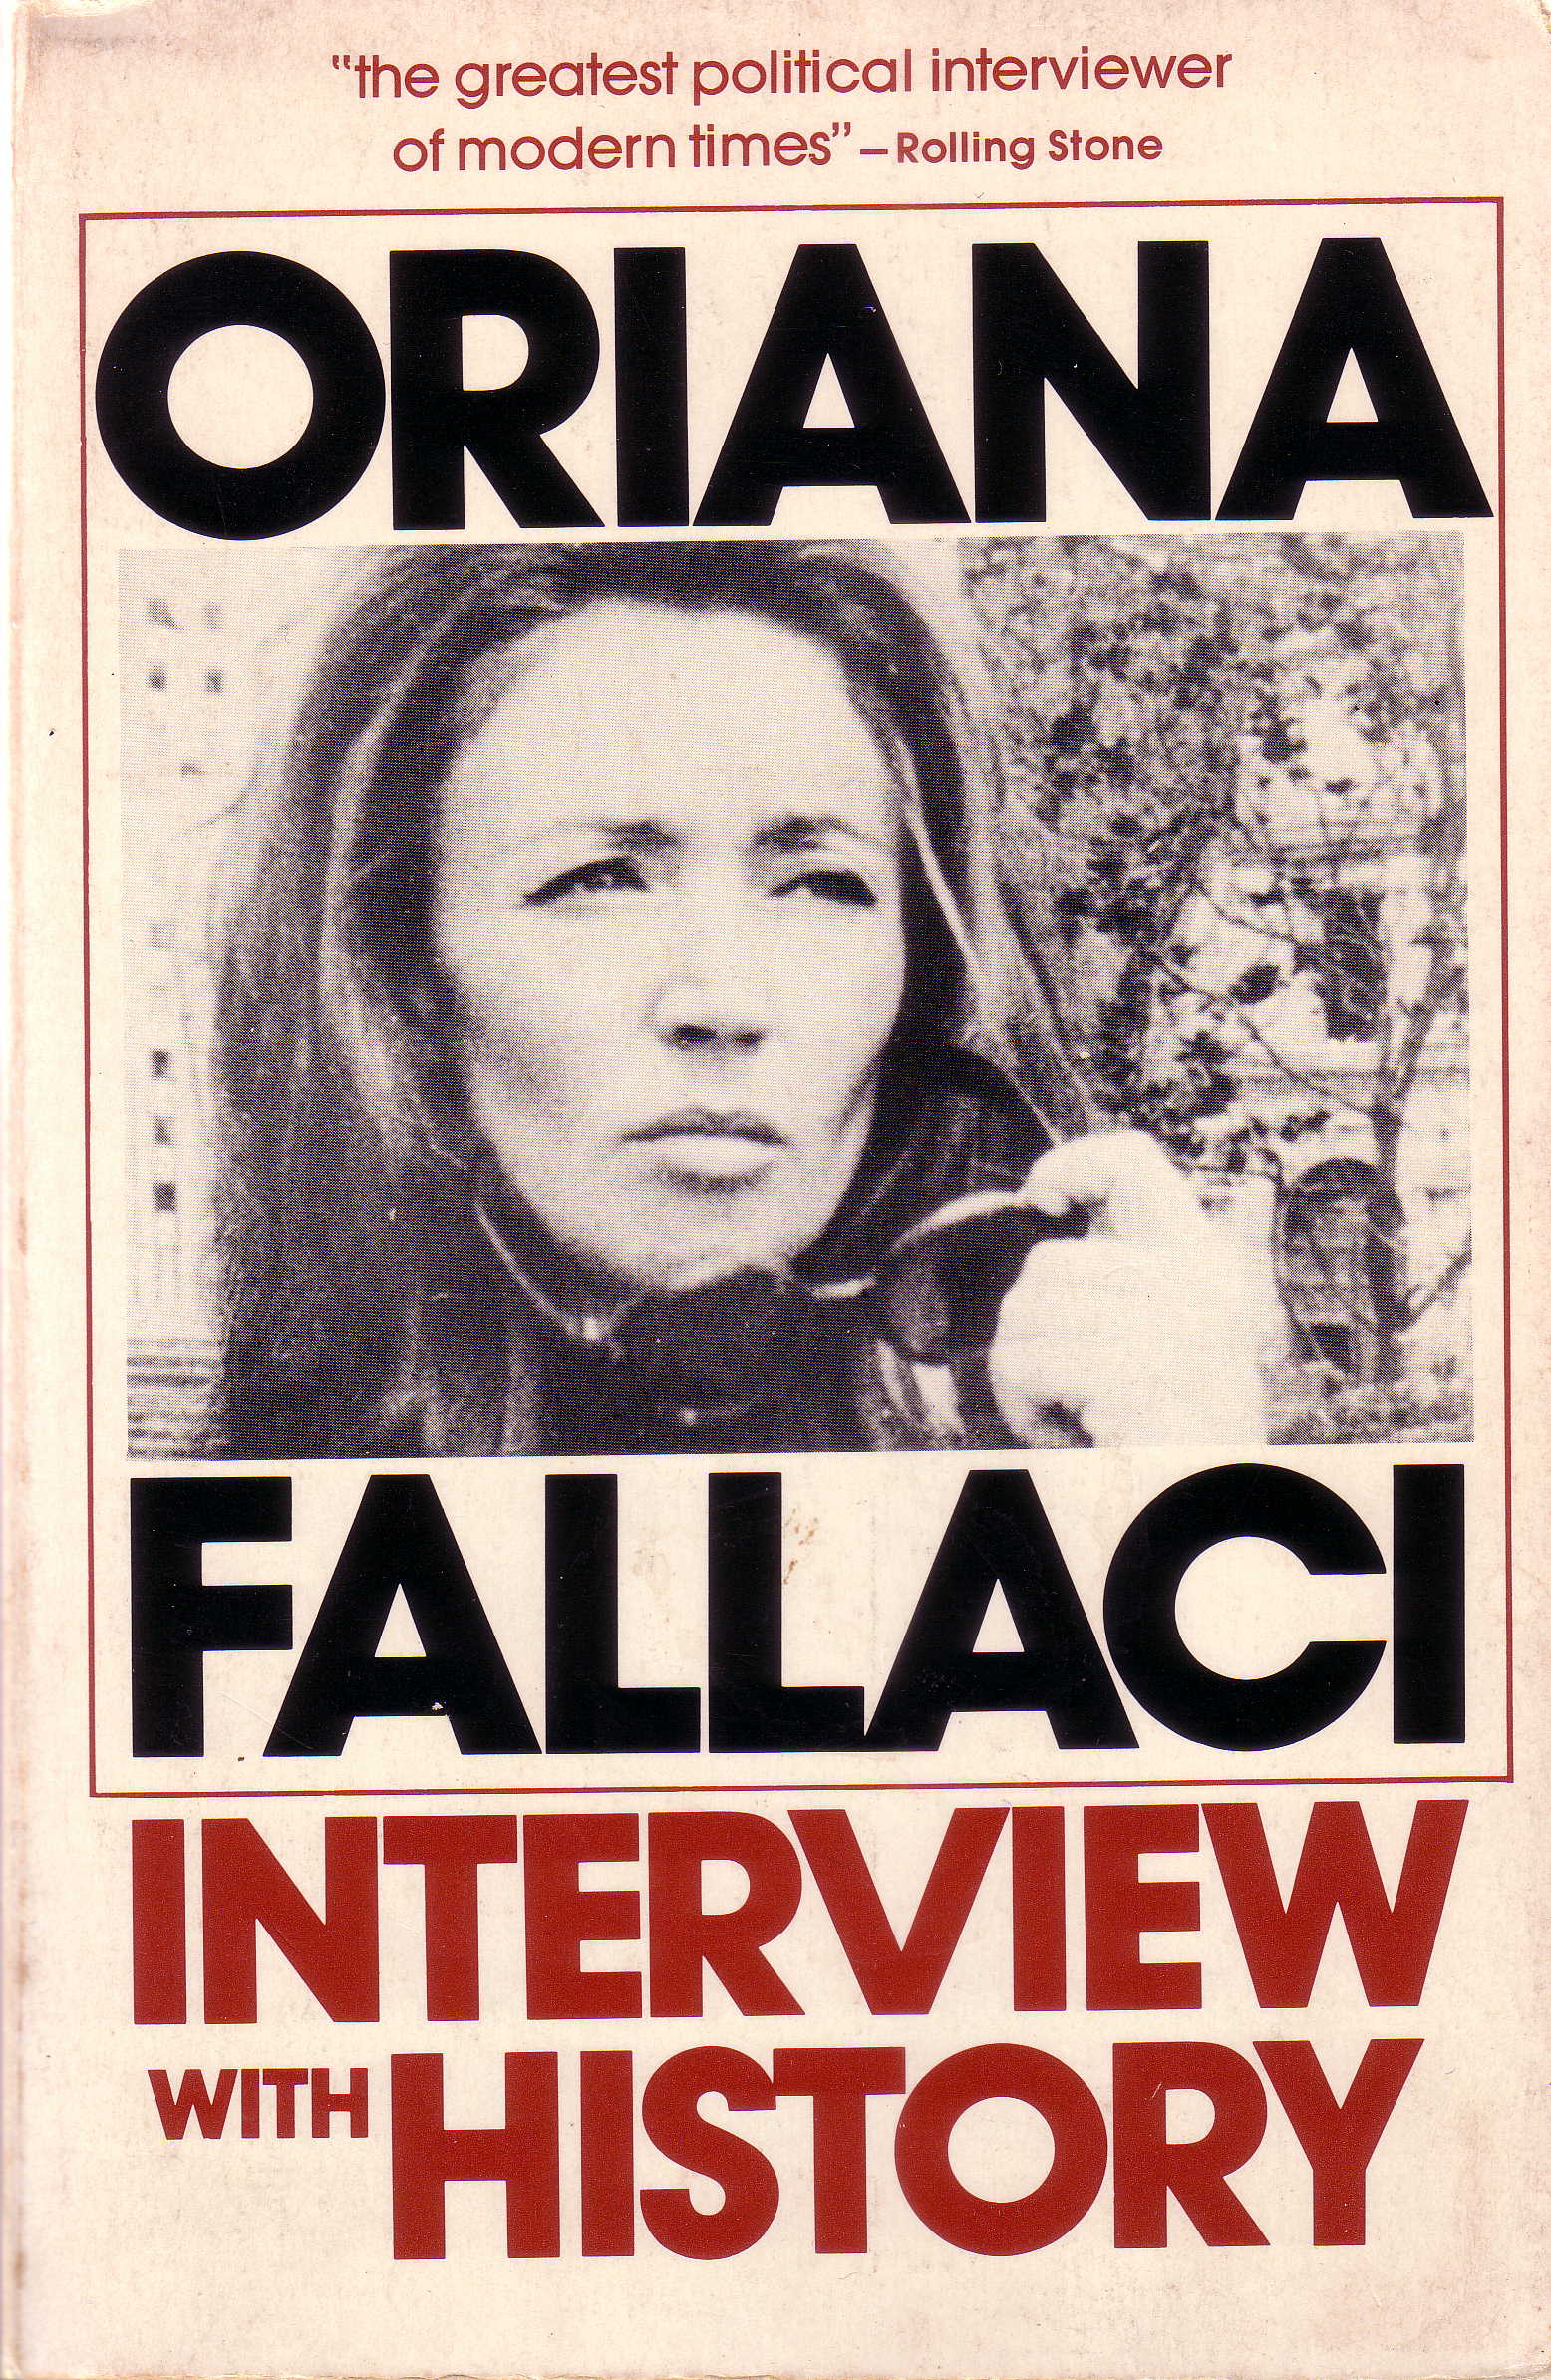 Oriana Fallaci Interview with History book cover